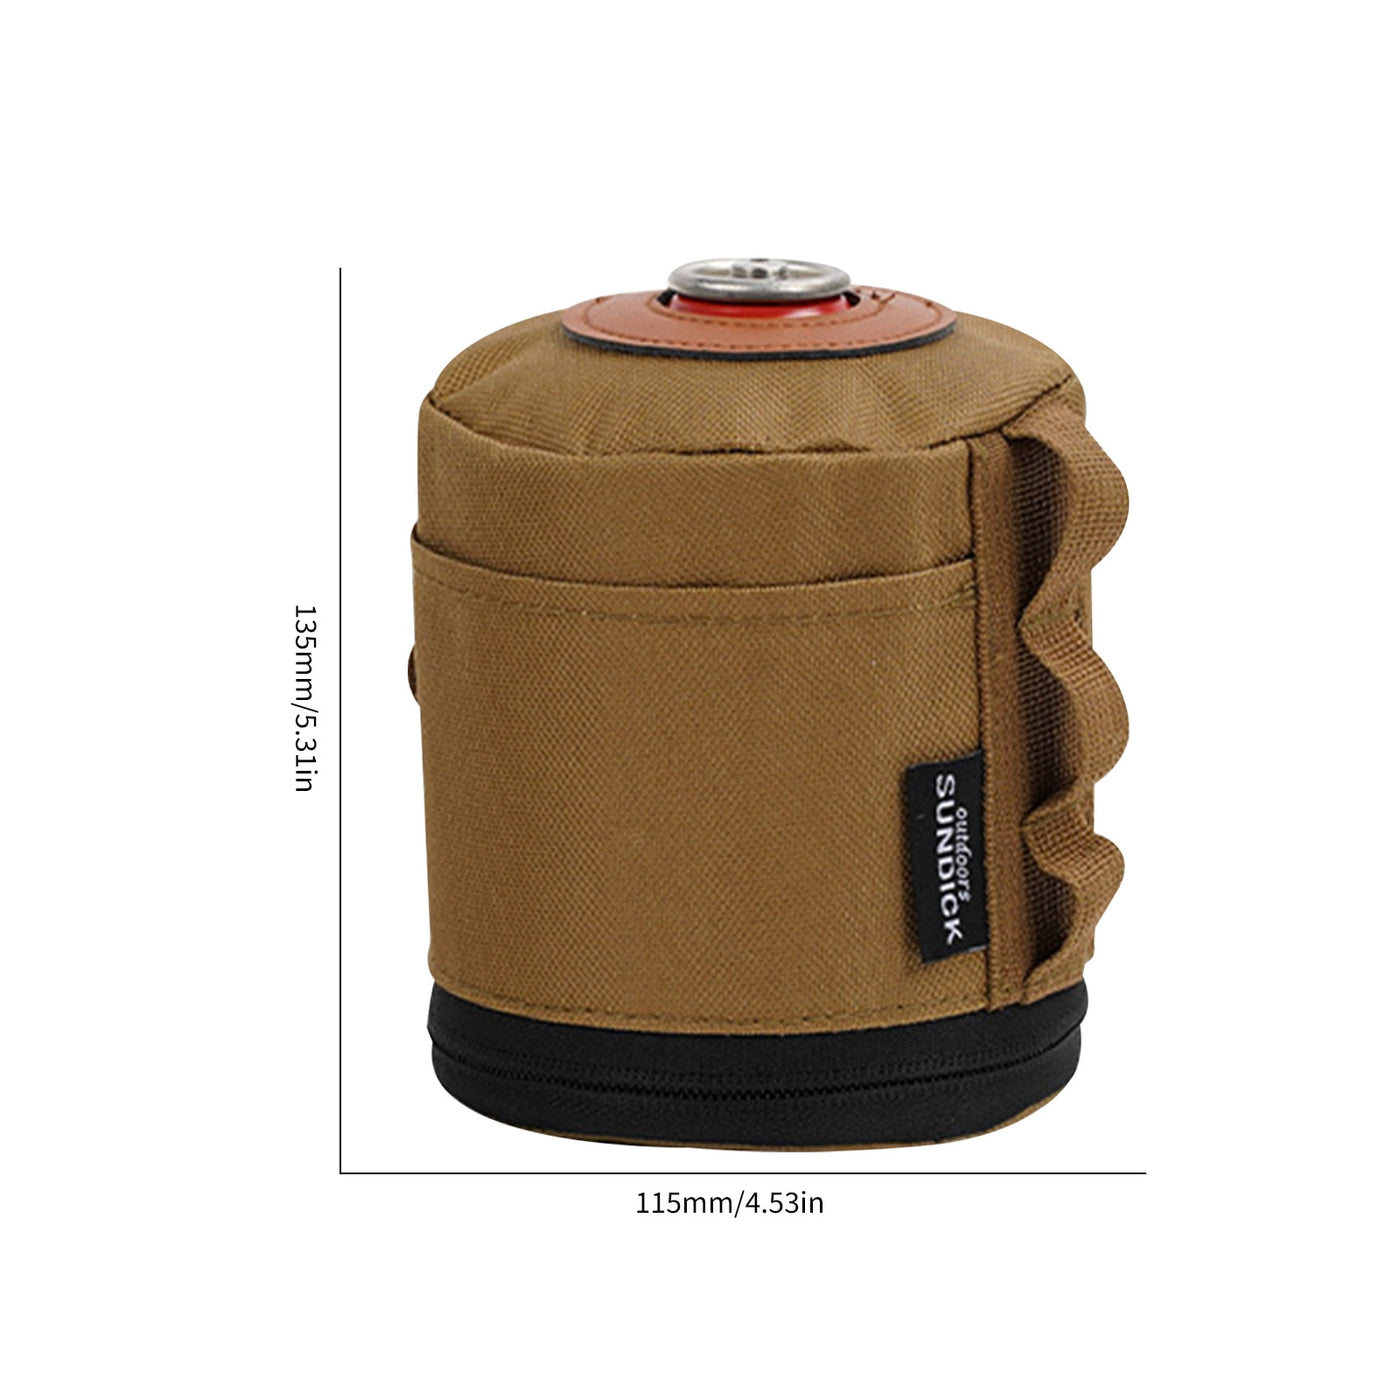 Gas Tank Case BBQ Gas canister protective cover